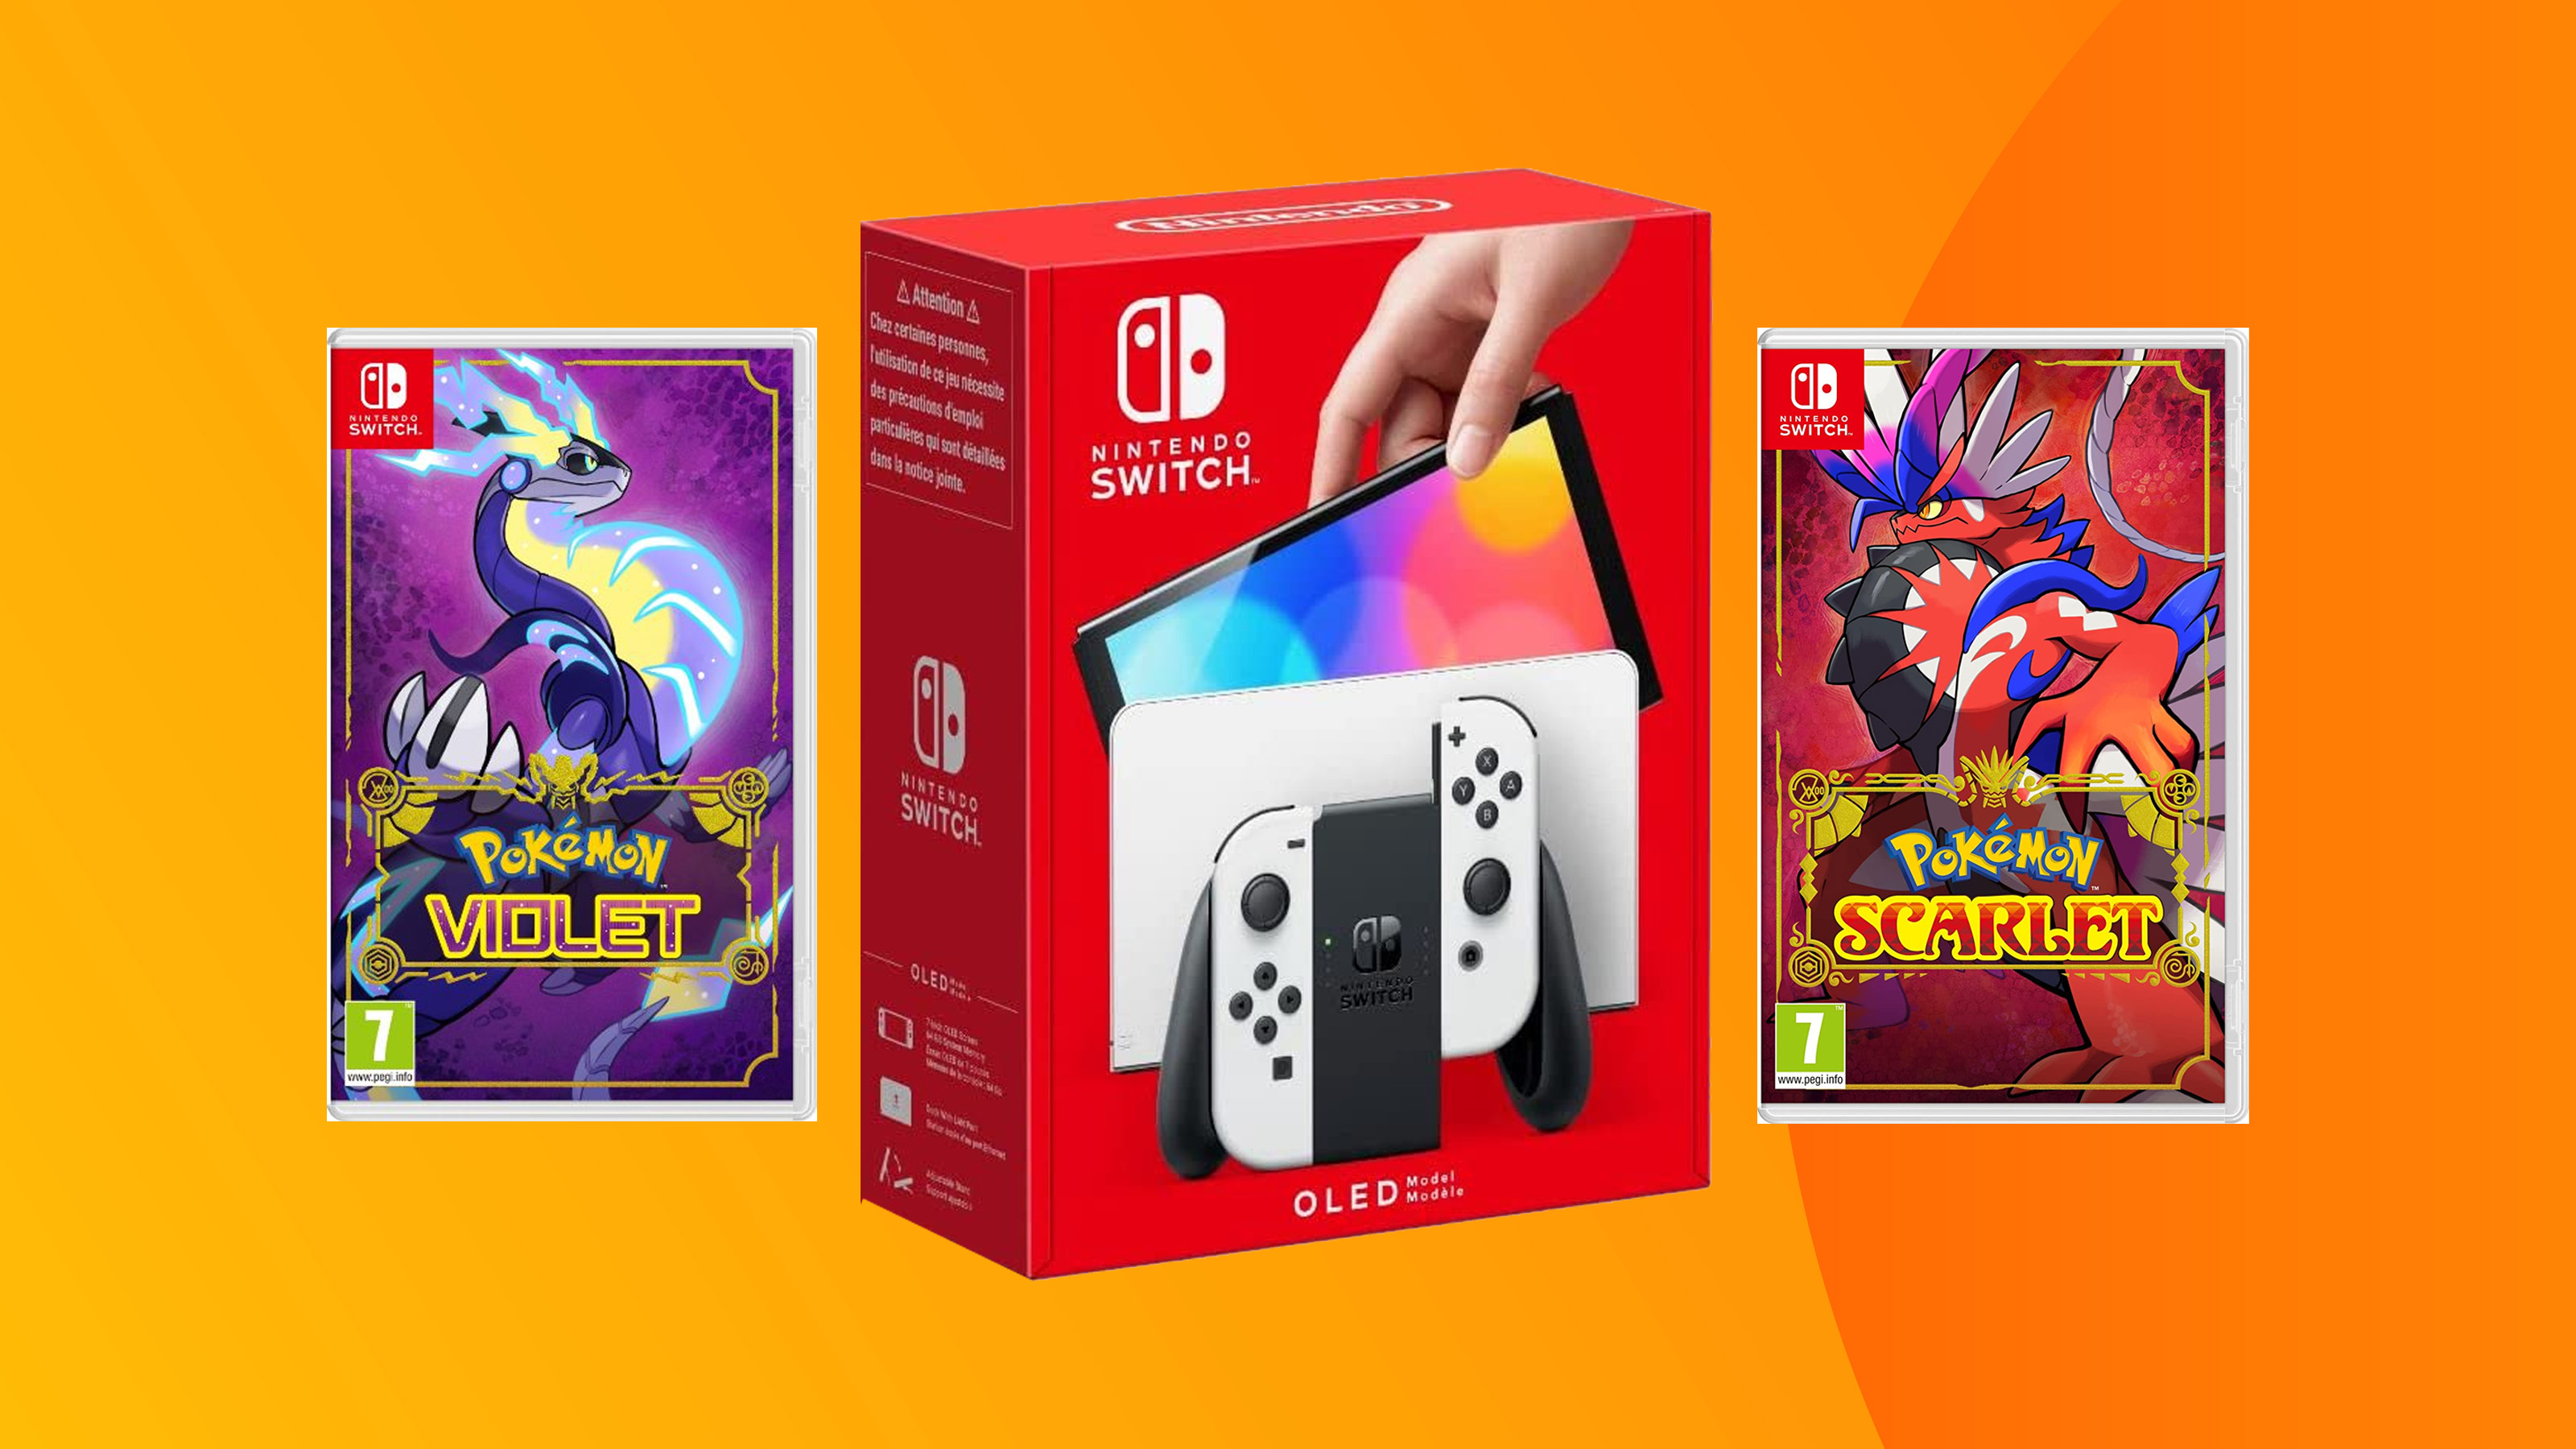 A product shot of the Switch OLED console and Pokemon games against a colored background